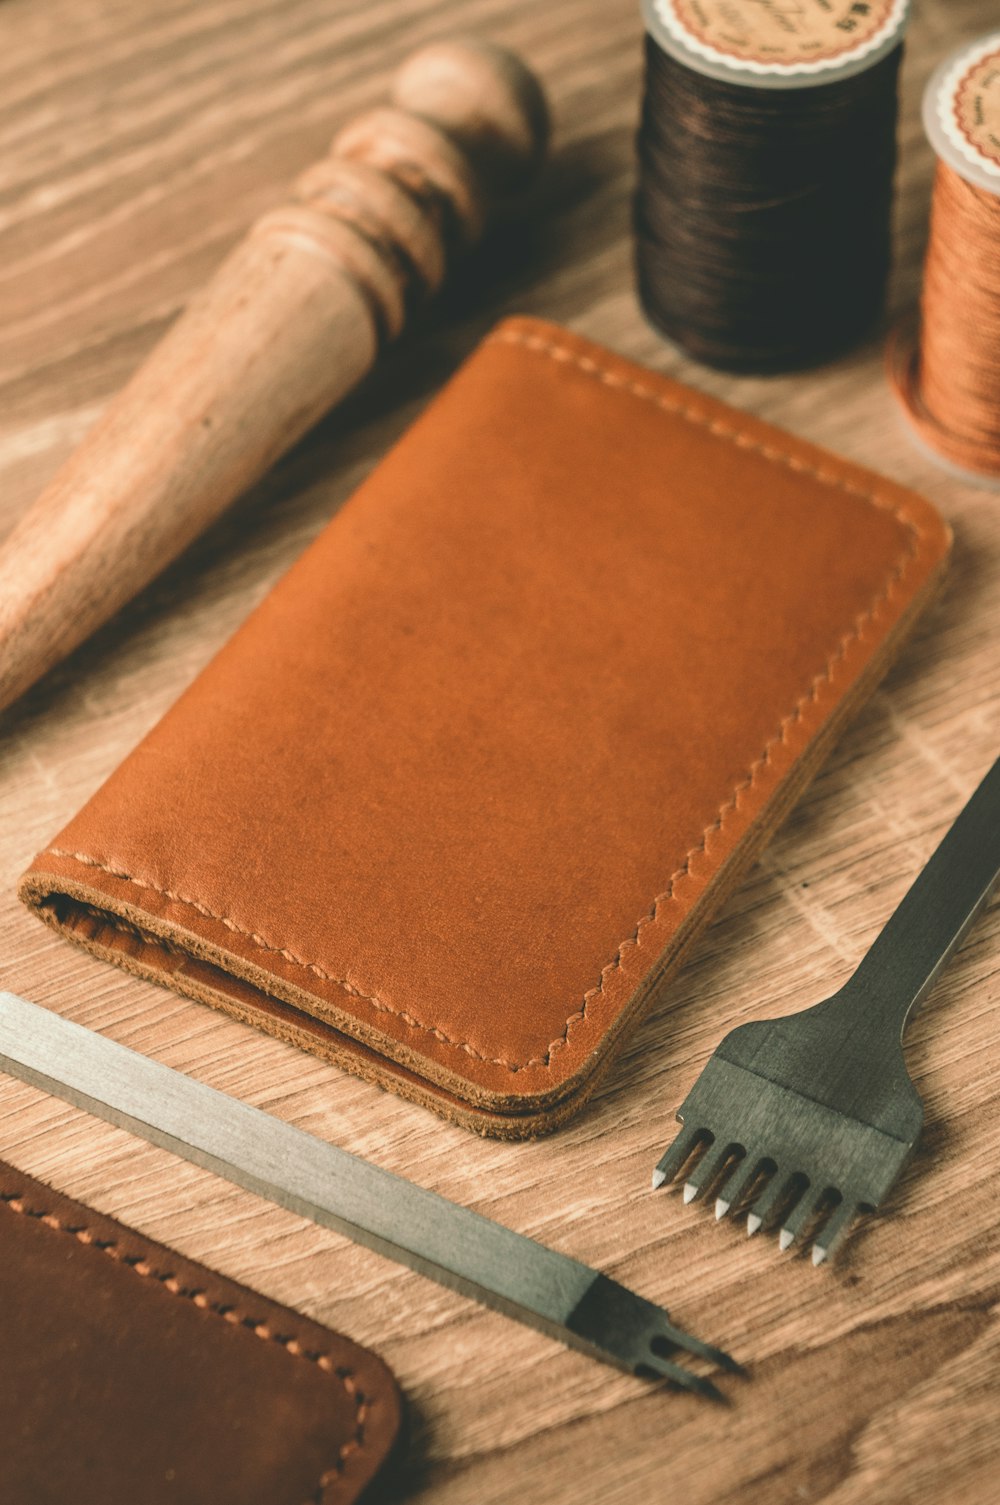 a leather wallet, a comb, thread, and scissors on a table